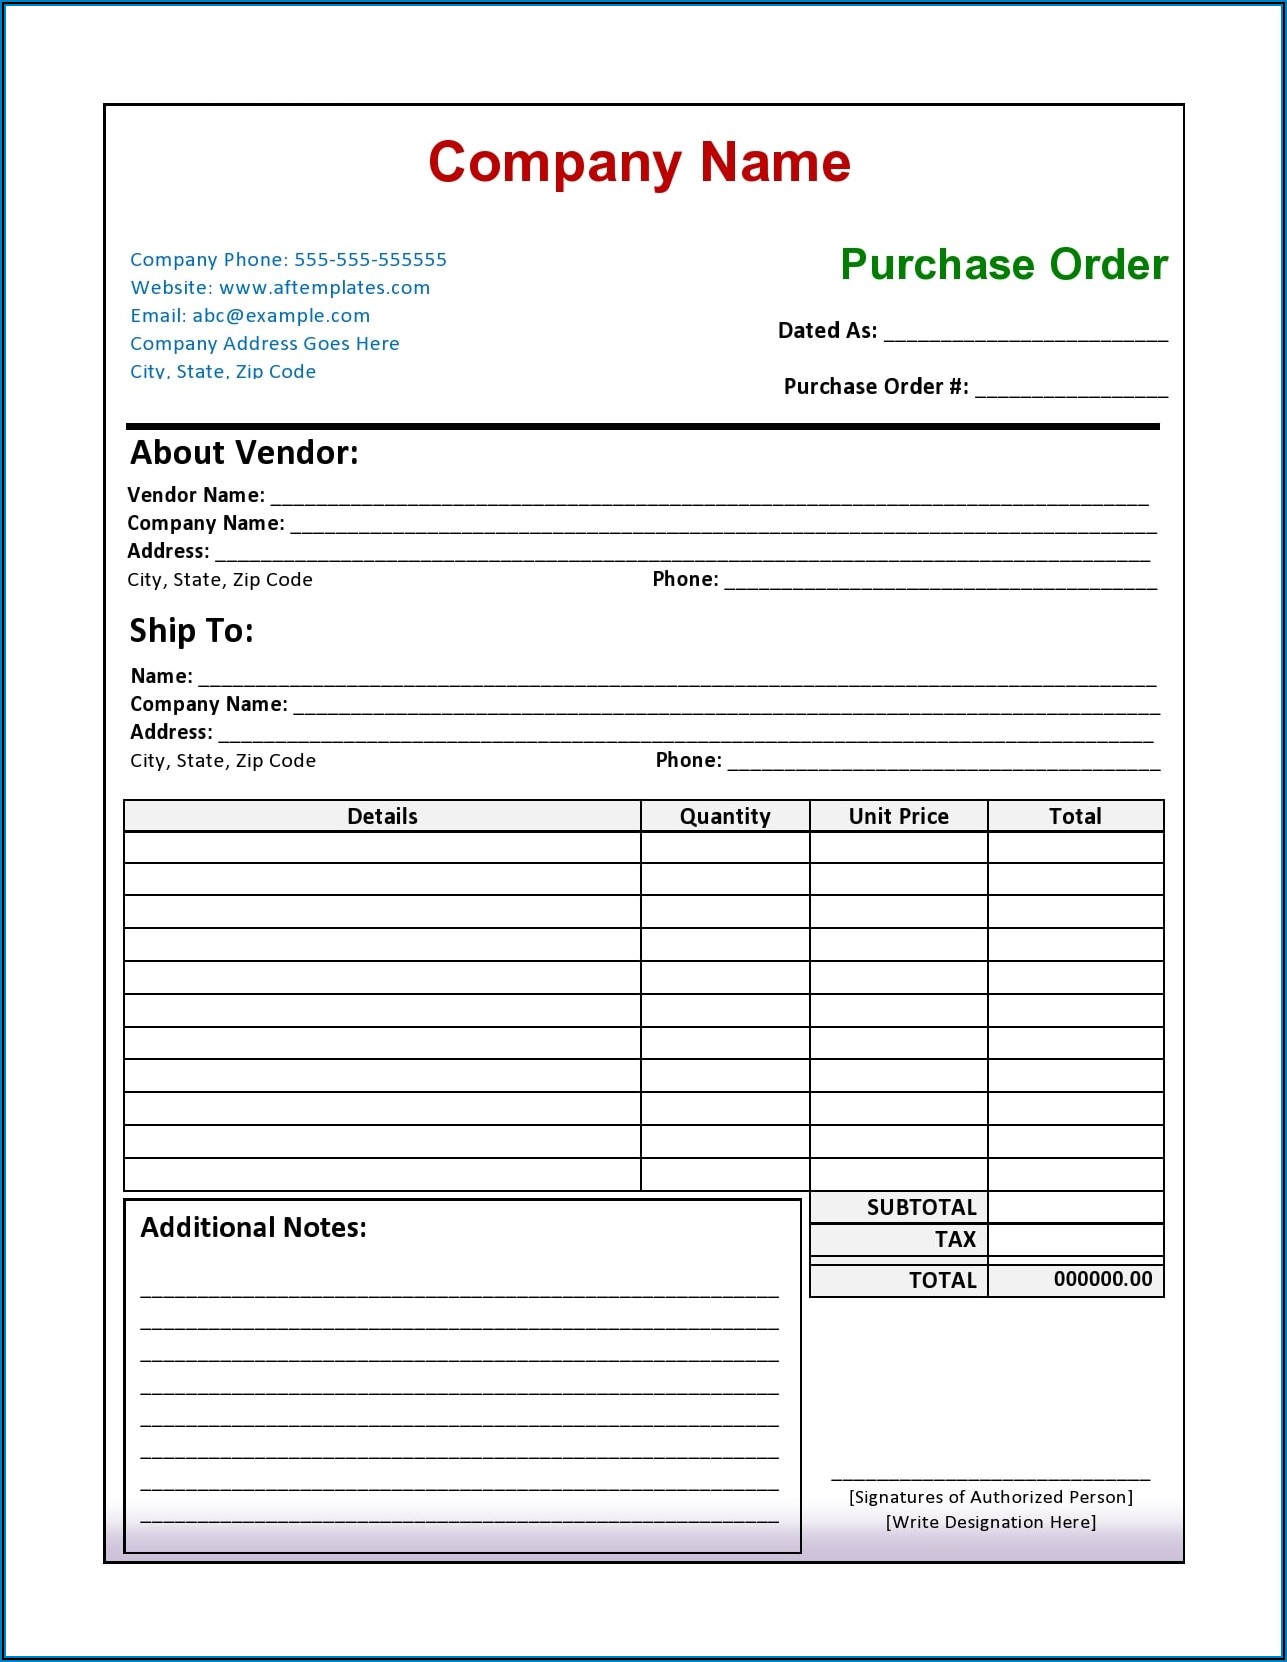 Purchase Order Form Sample Free Download